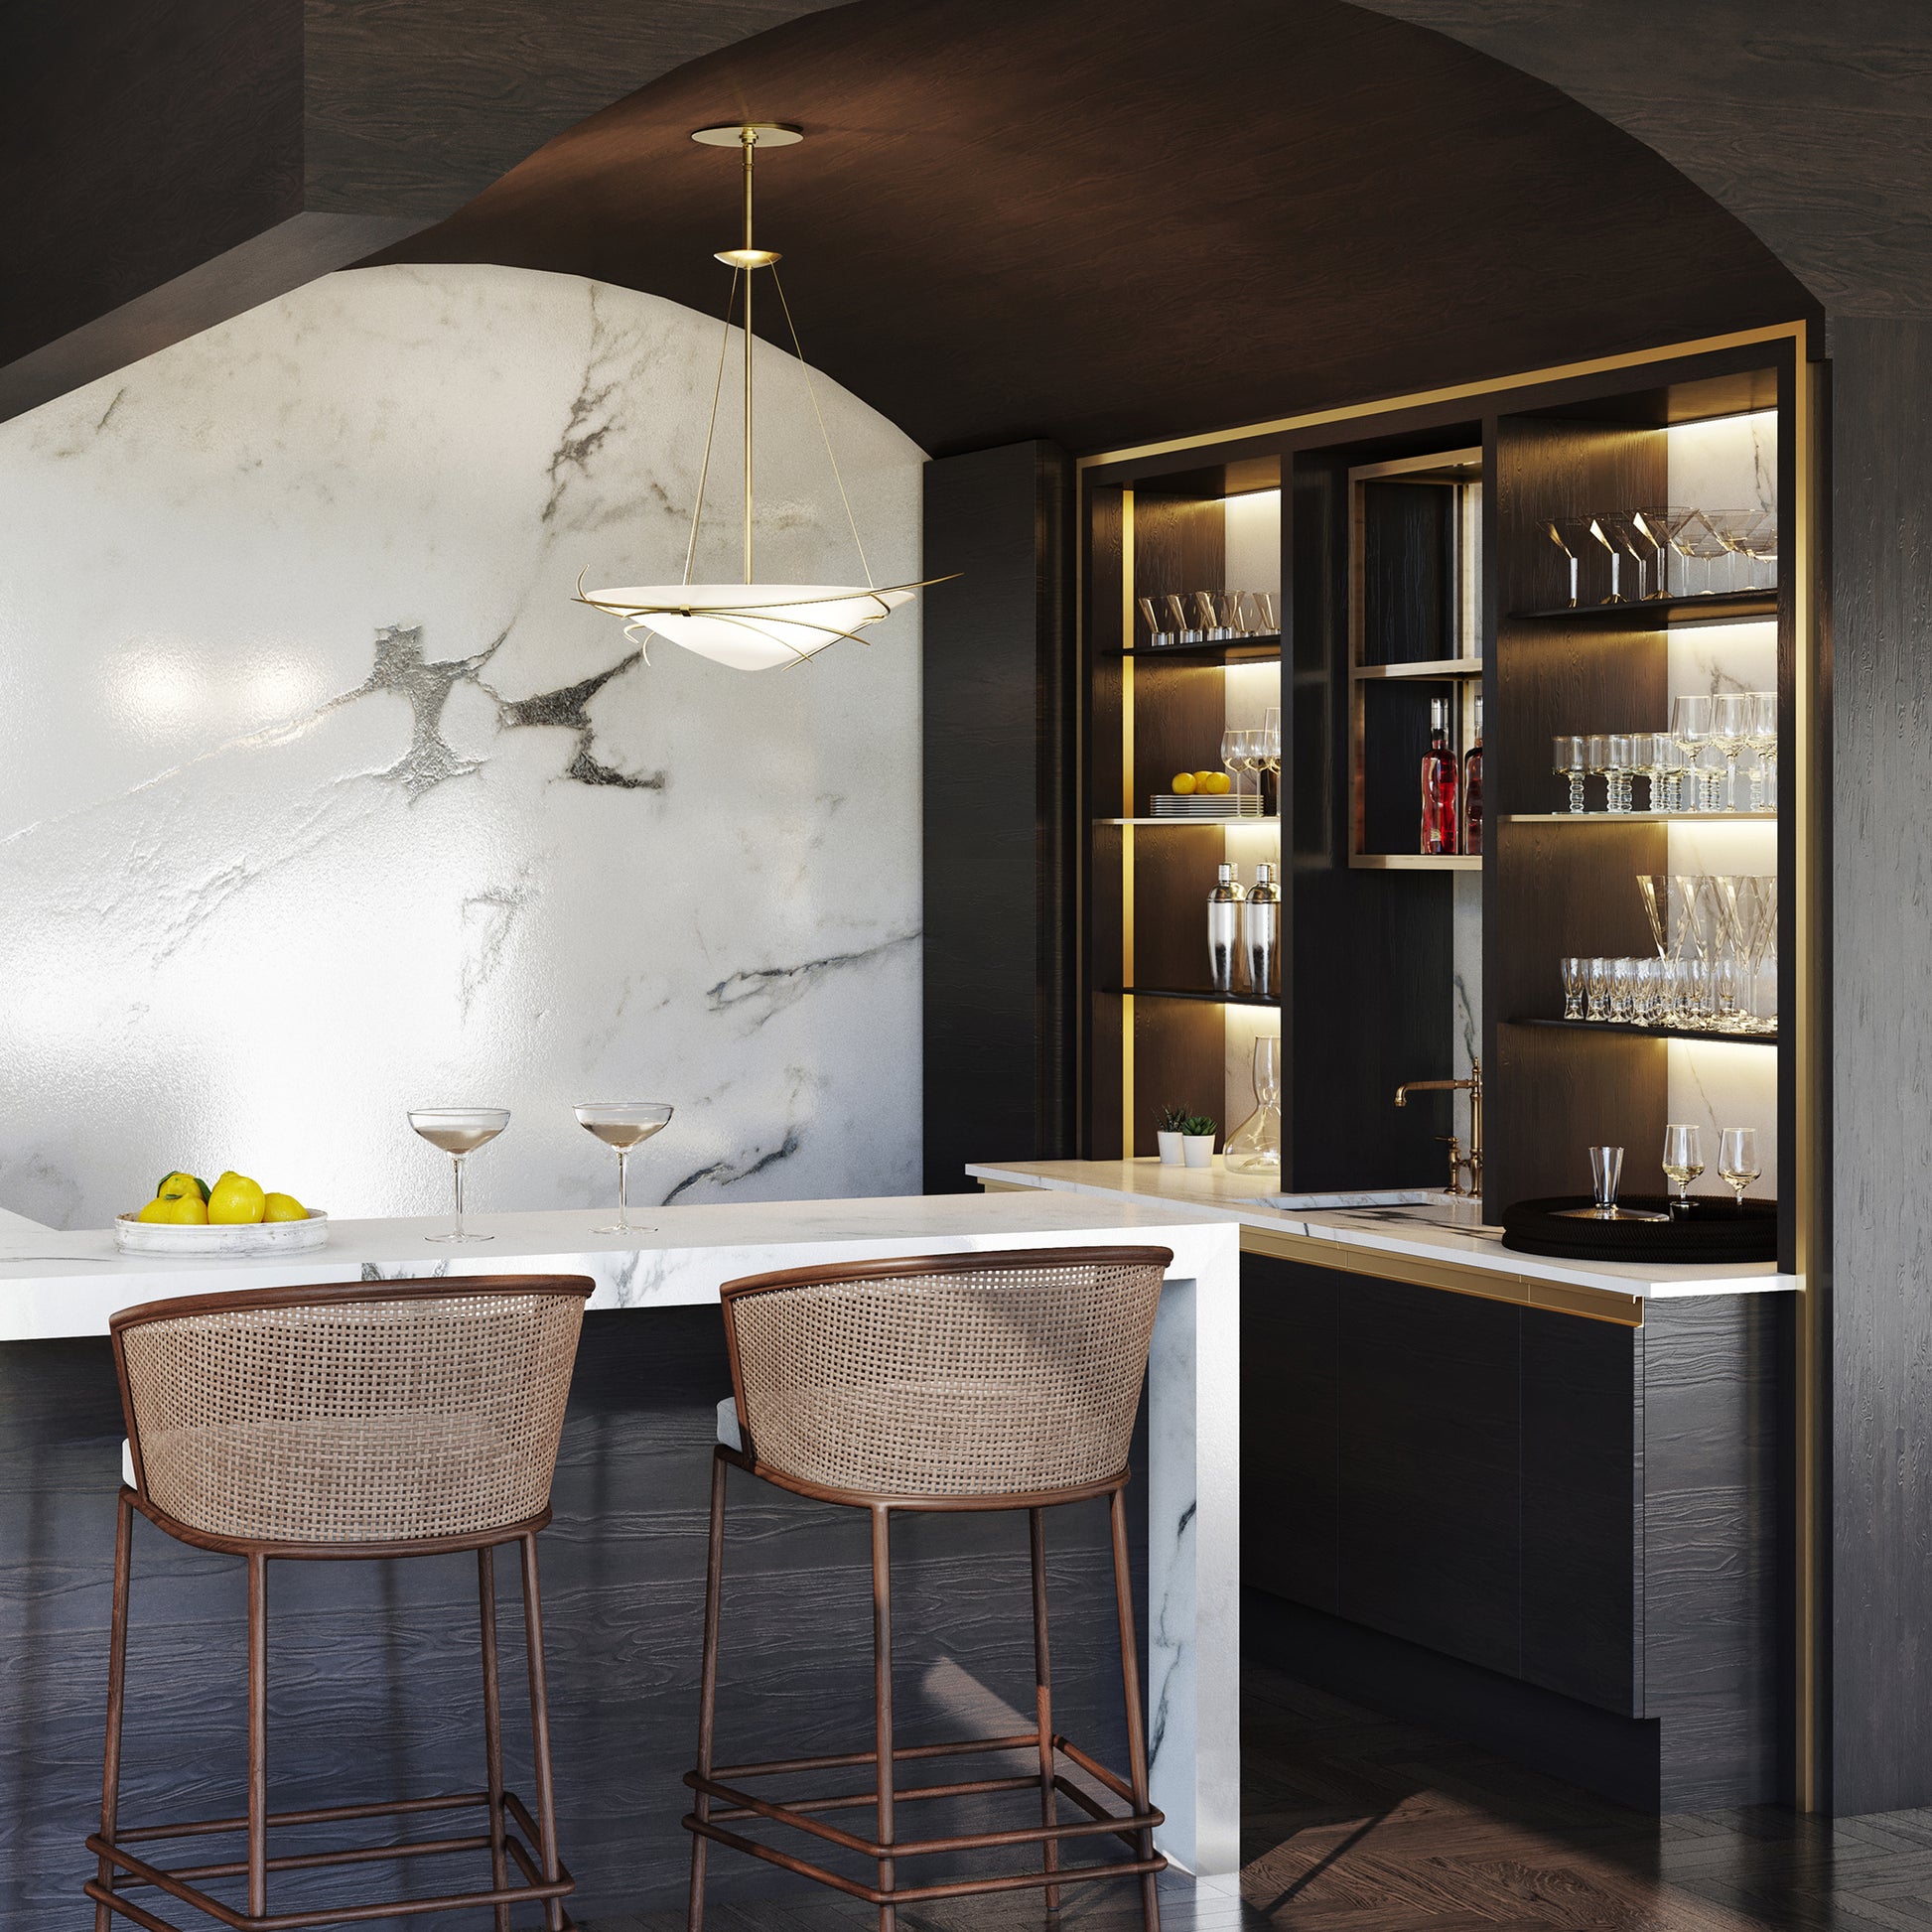 A modern bar with tailored marble counter tops and stools, featuring the Hubbardton Forge Wisp Pendant, creating an elegant ambiance.